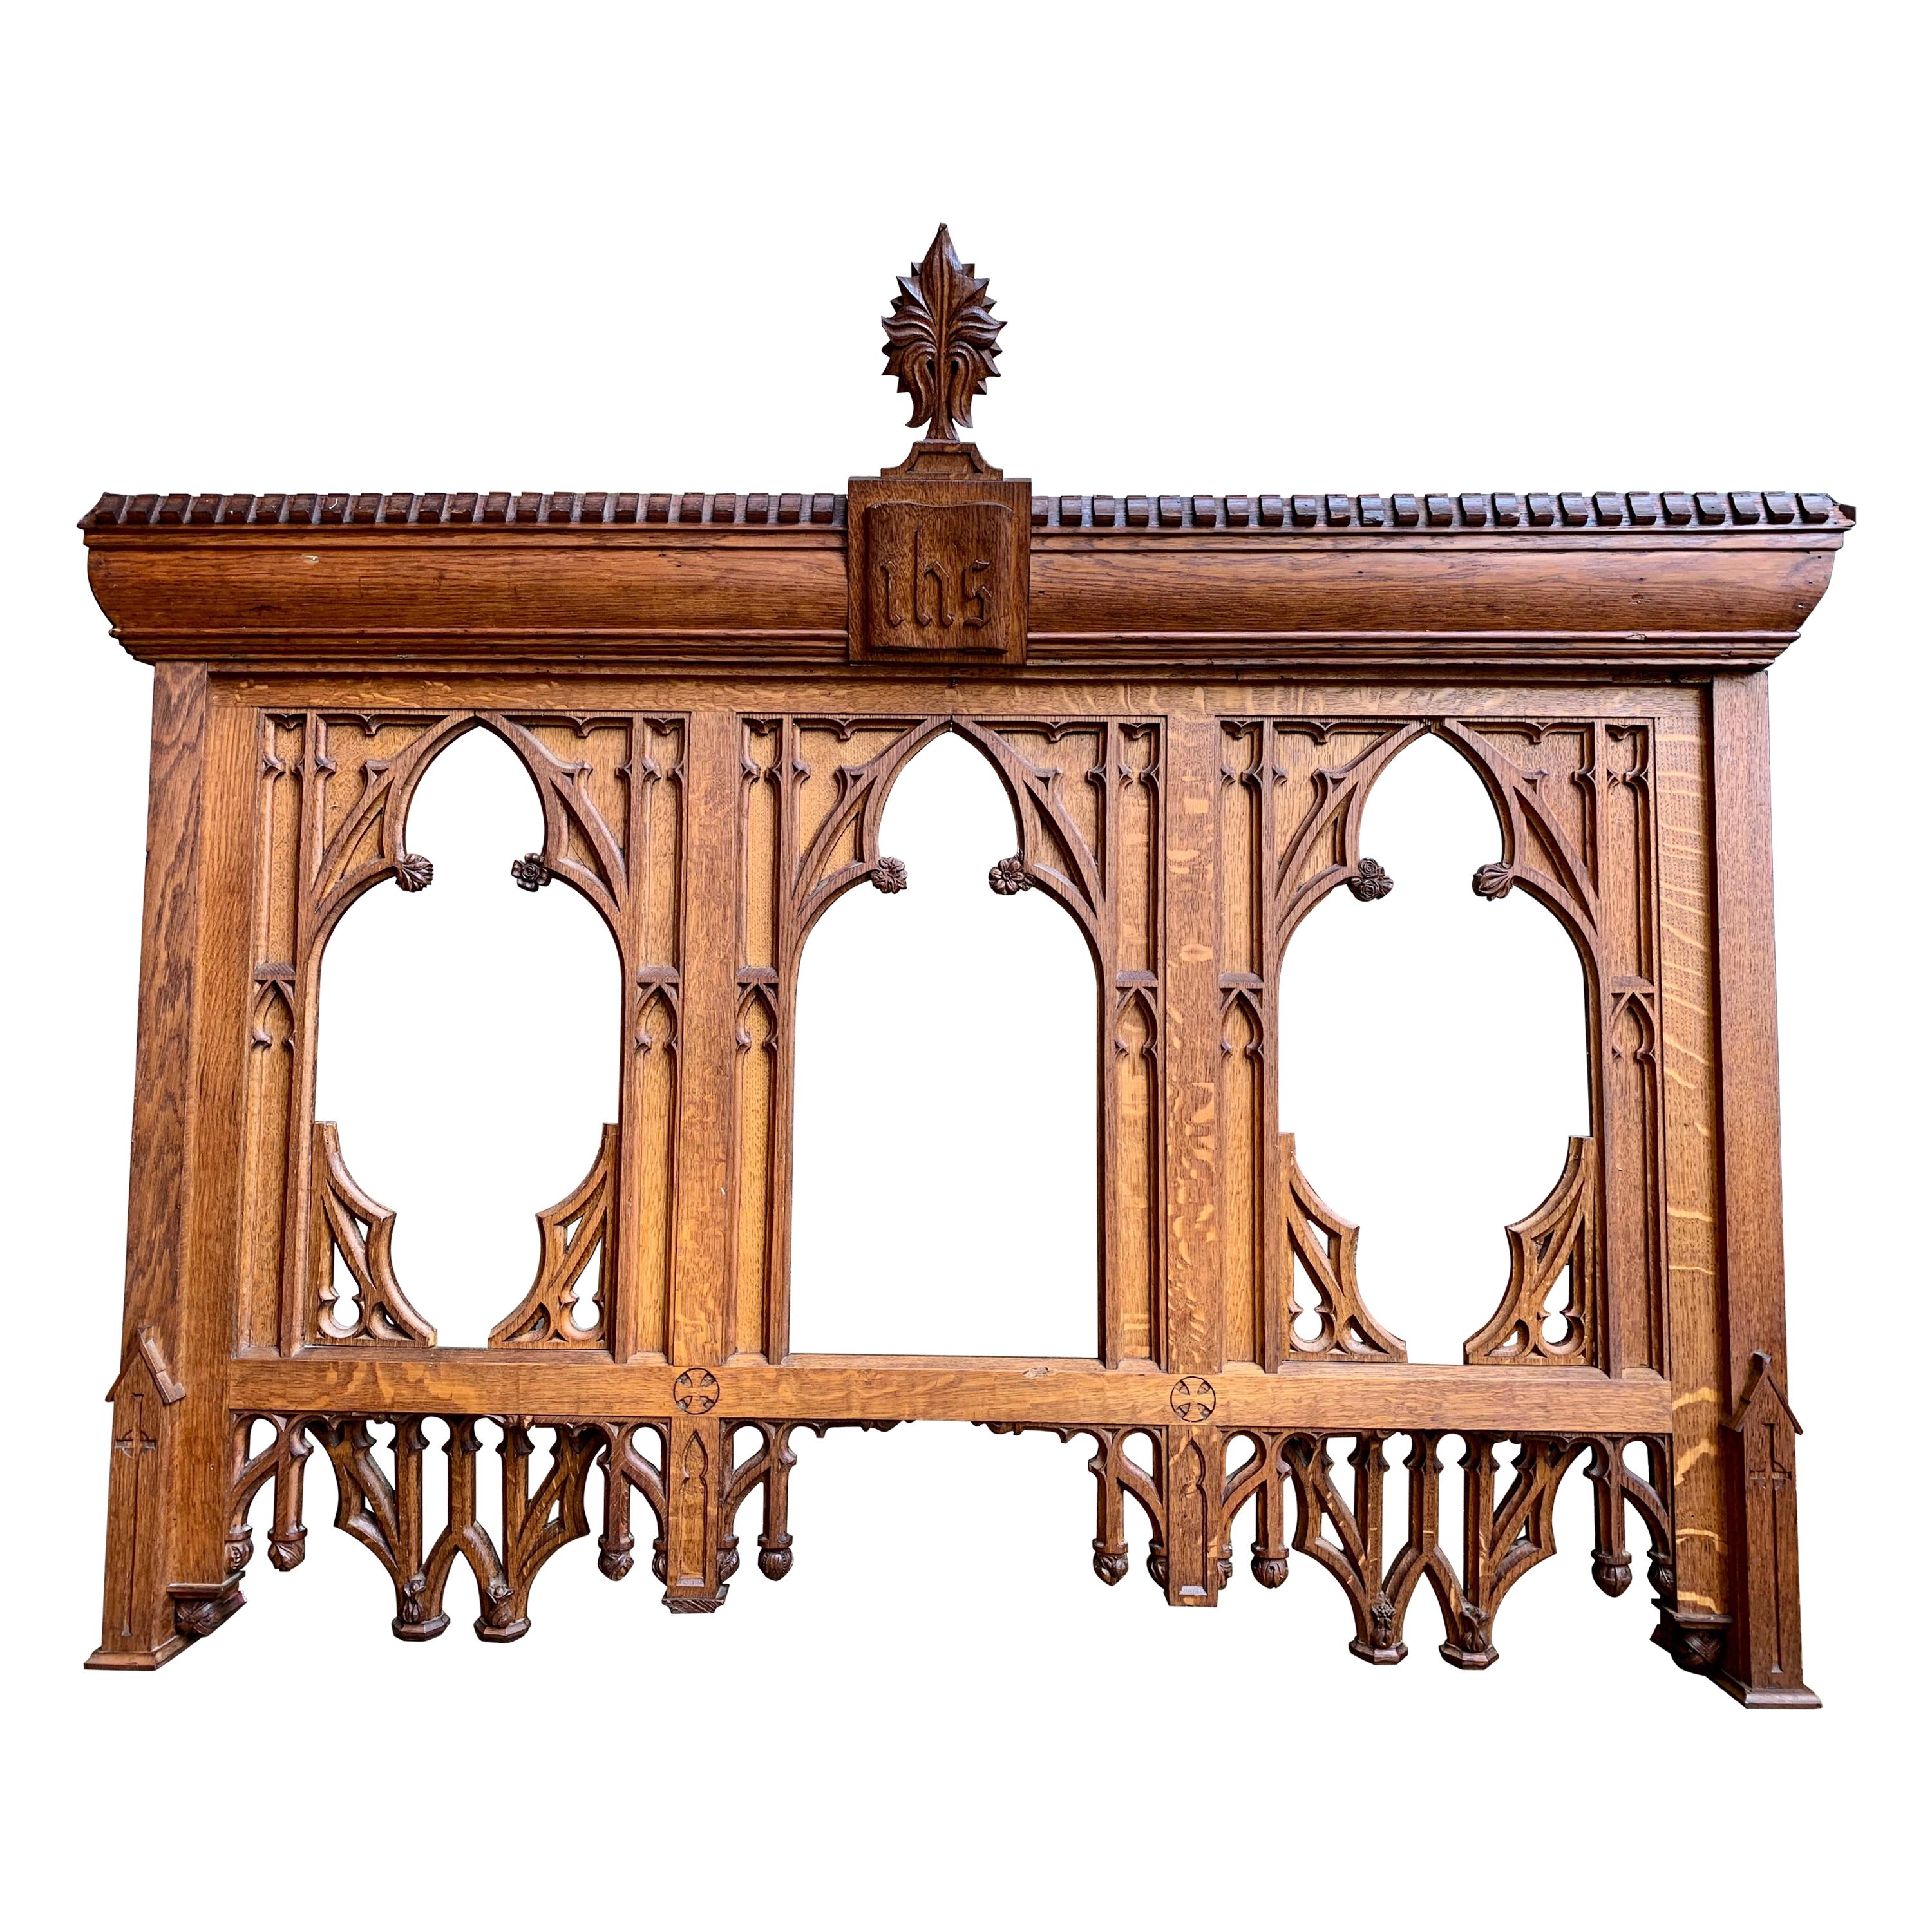 Antique French Carved Oak Altar Wall Hanging Gothic Architectural Church Mantel